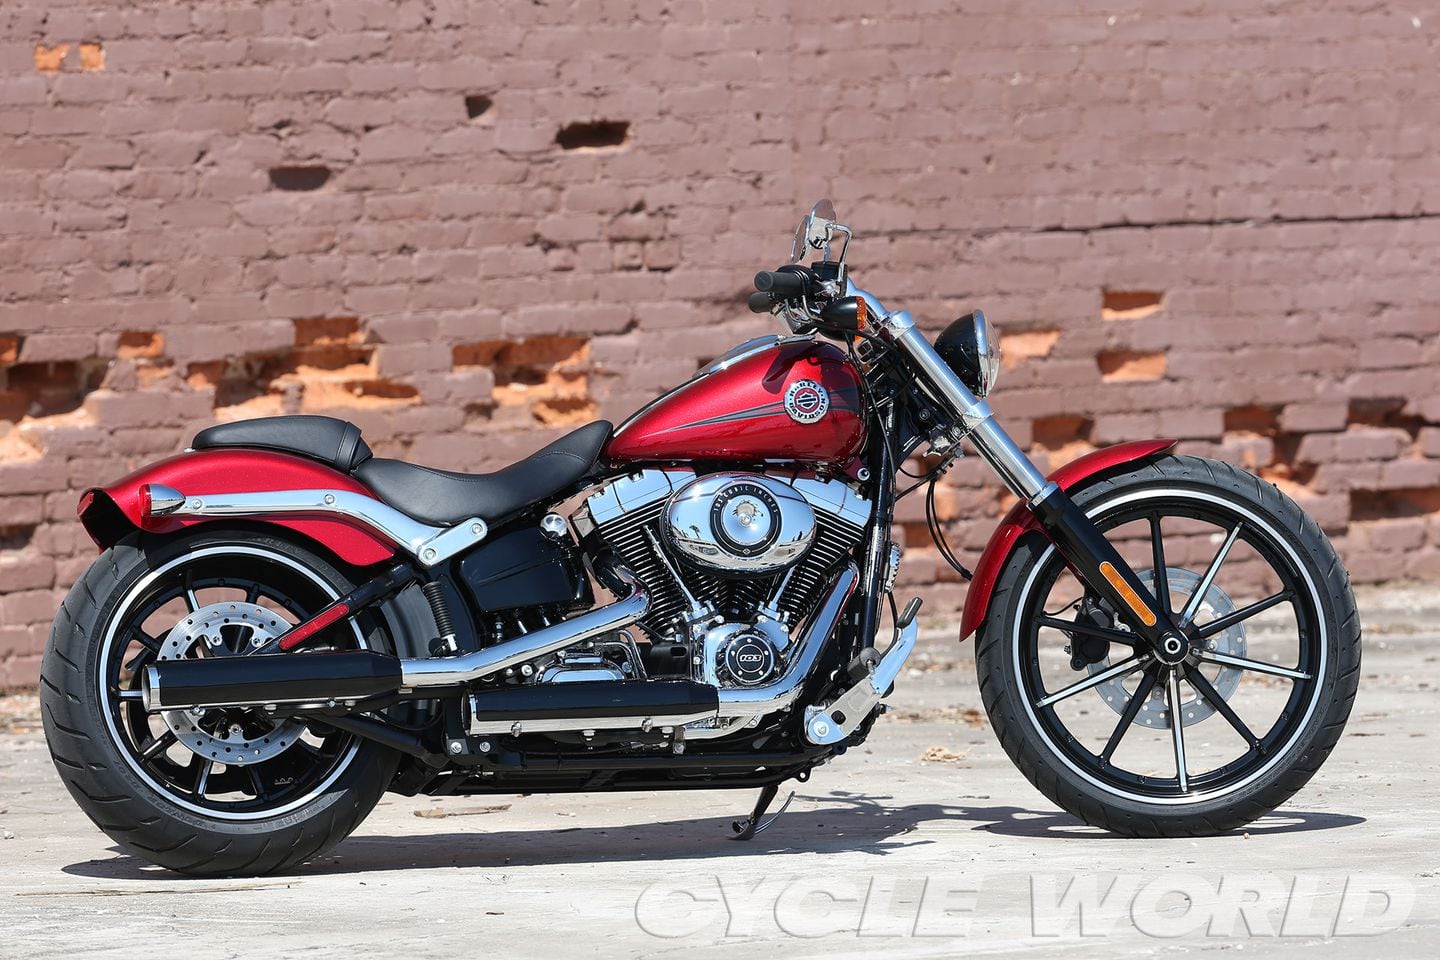 2013 Harley Davidson Fxsb Breakout First Ride Review Photos Cycle World